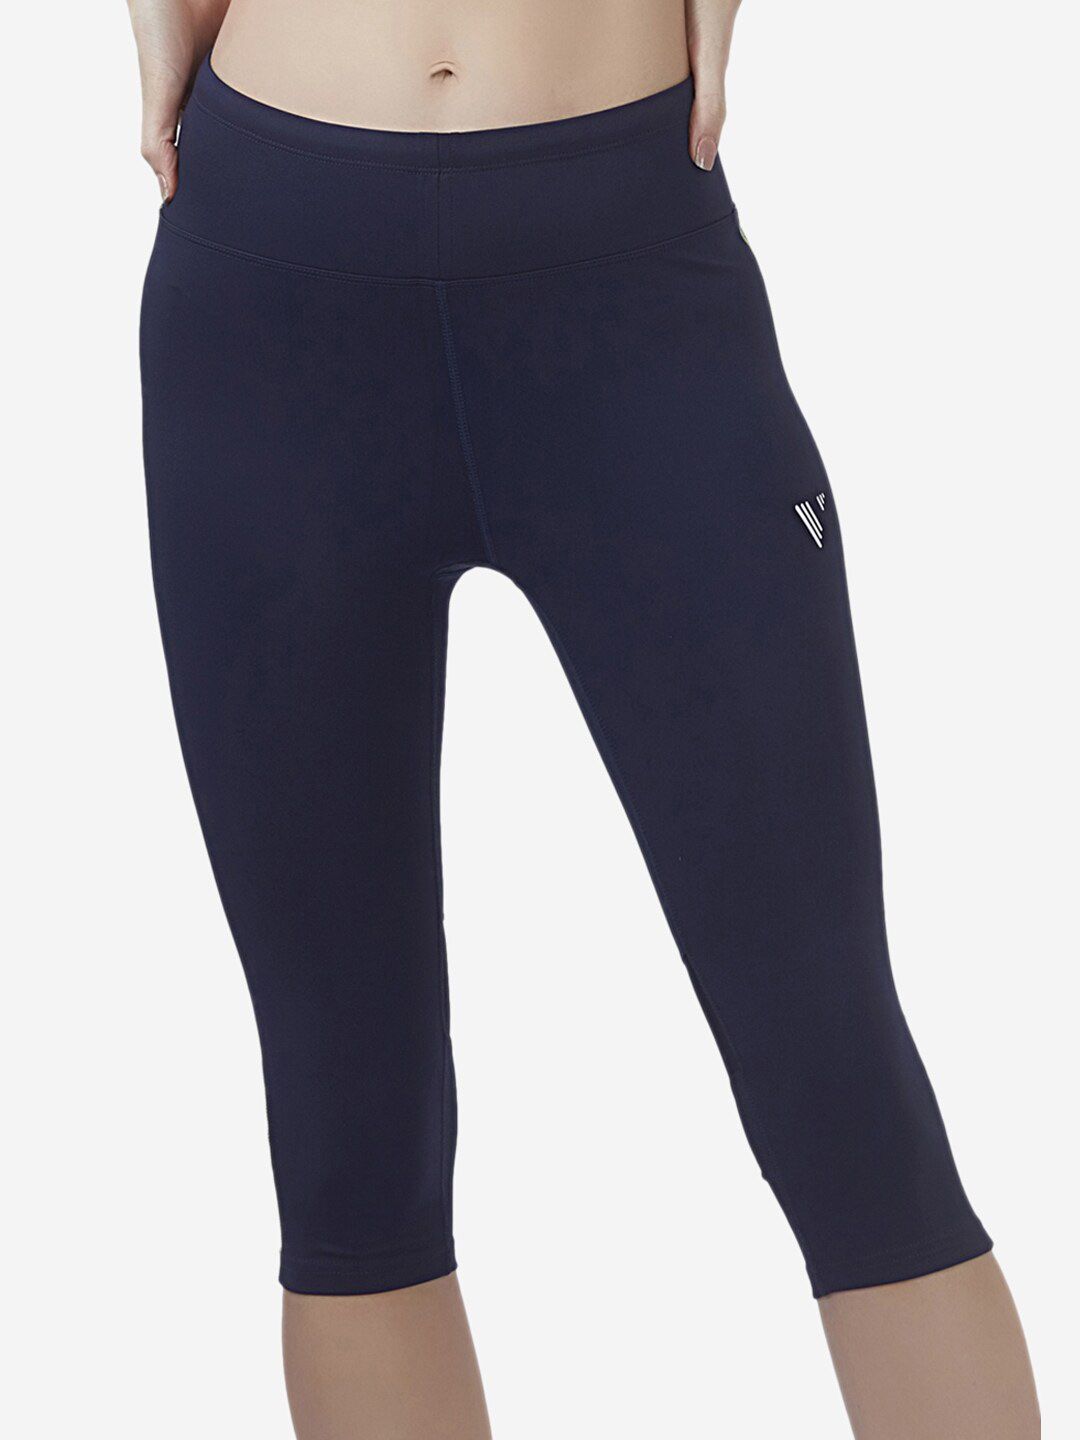 VELOZ Women + Size Navy Blue Solid Multisport 3/4th Tights Price in India